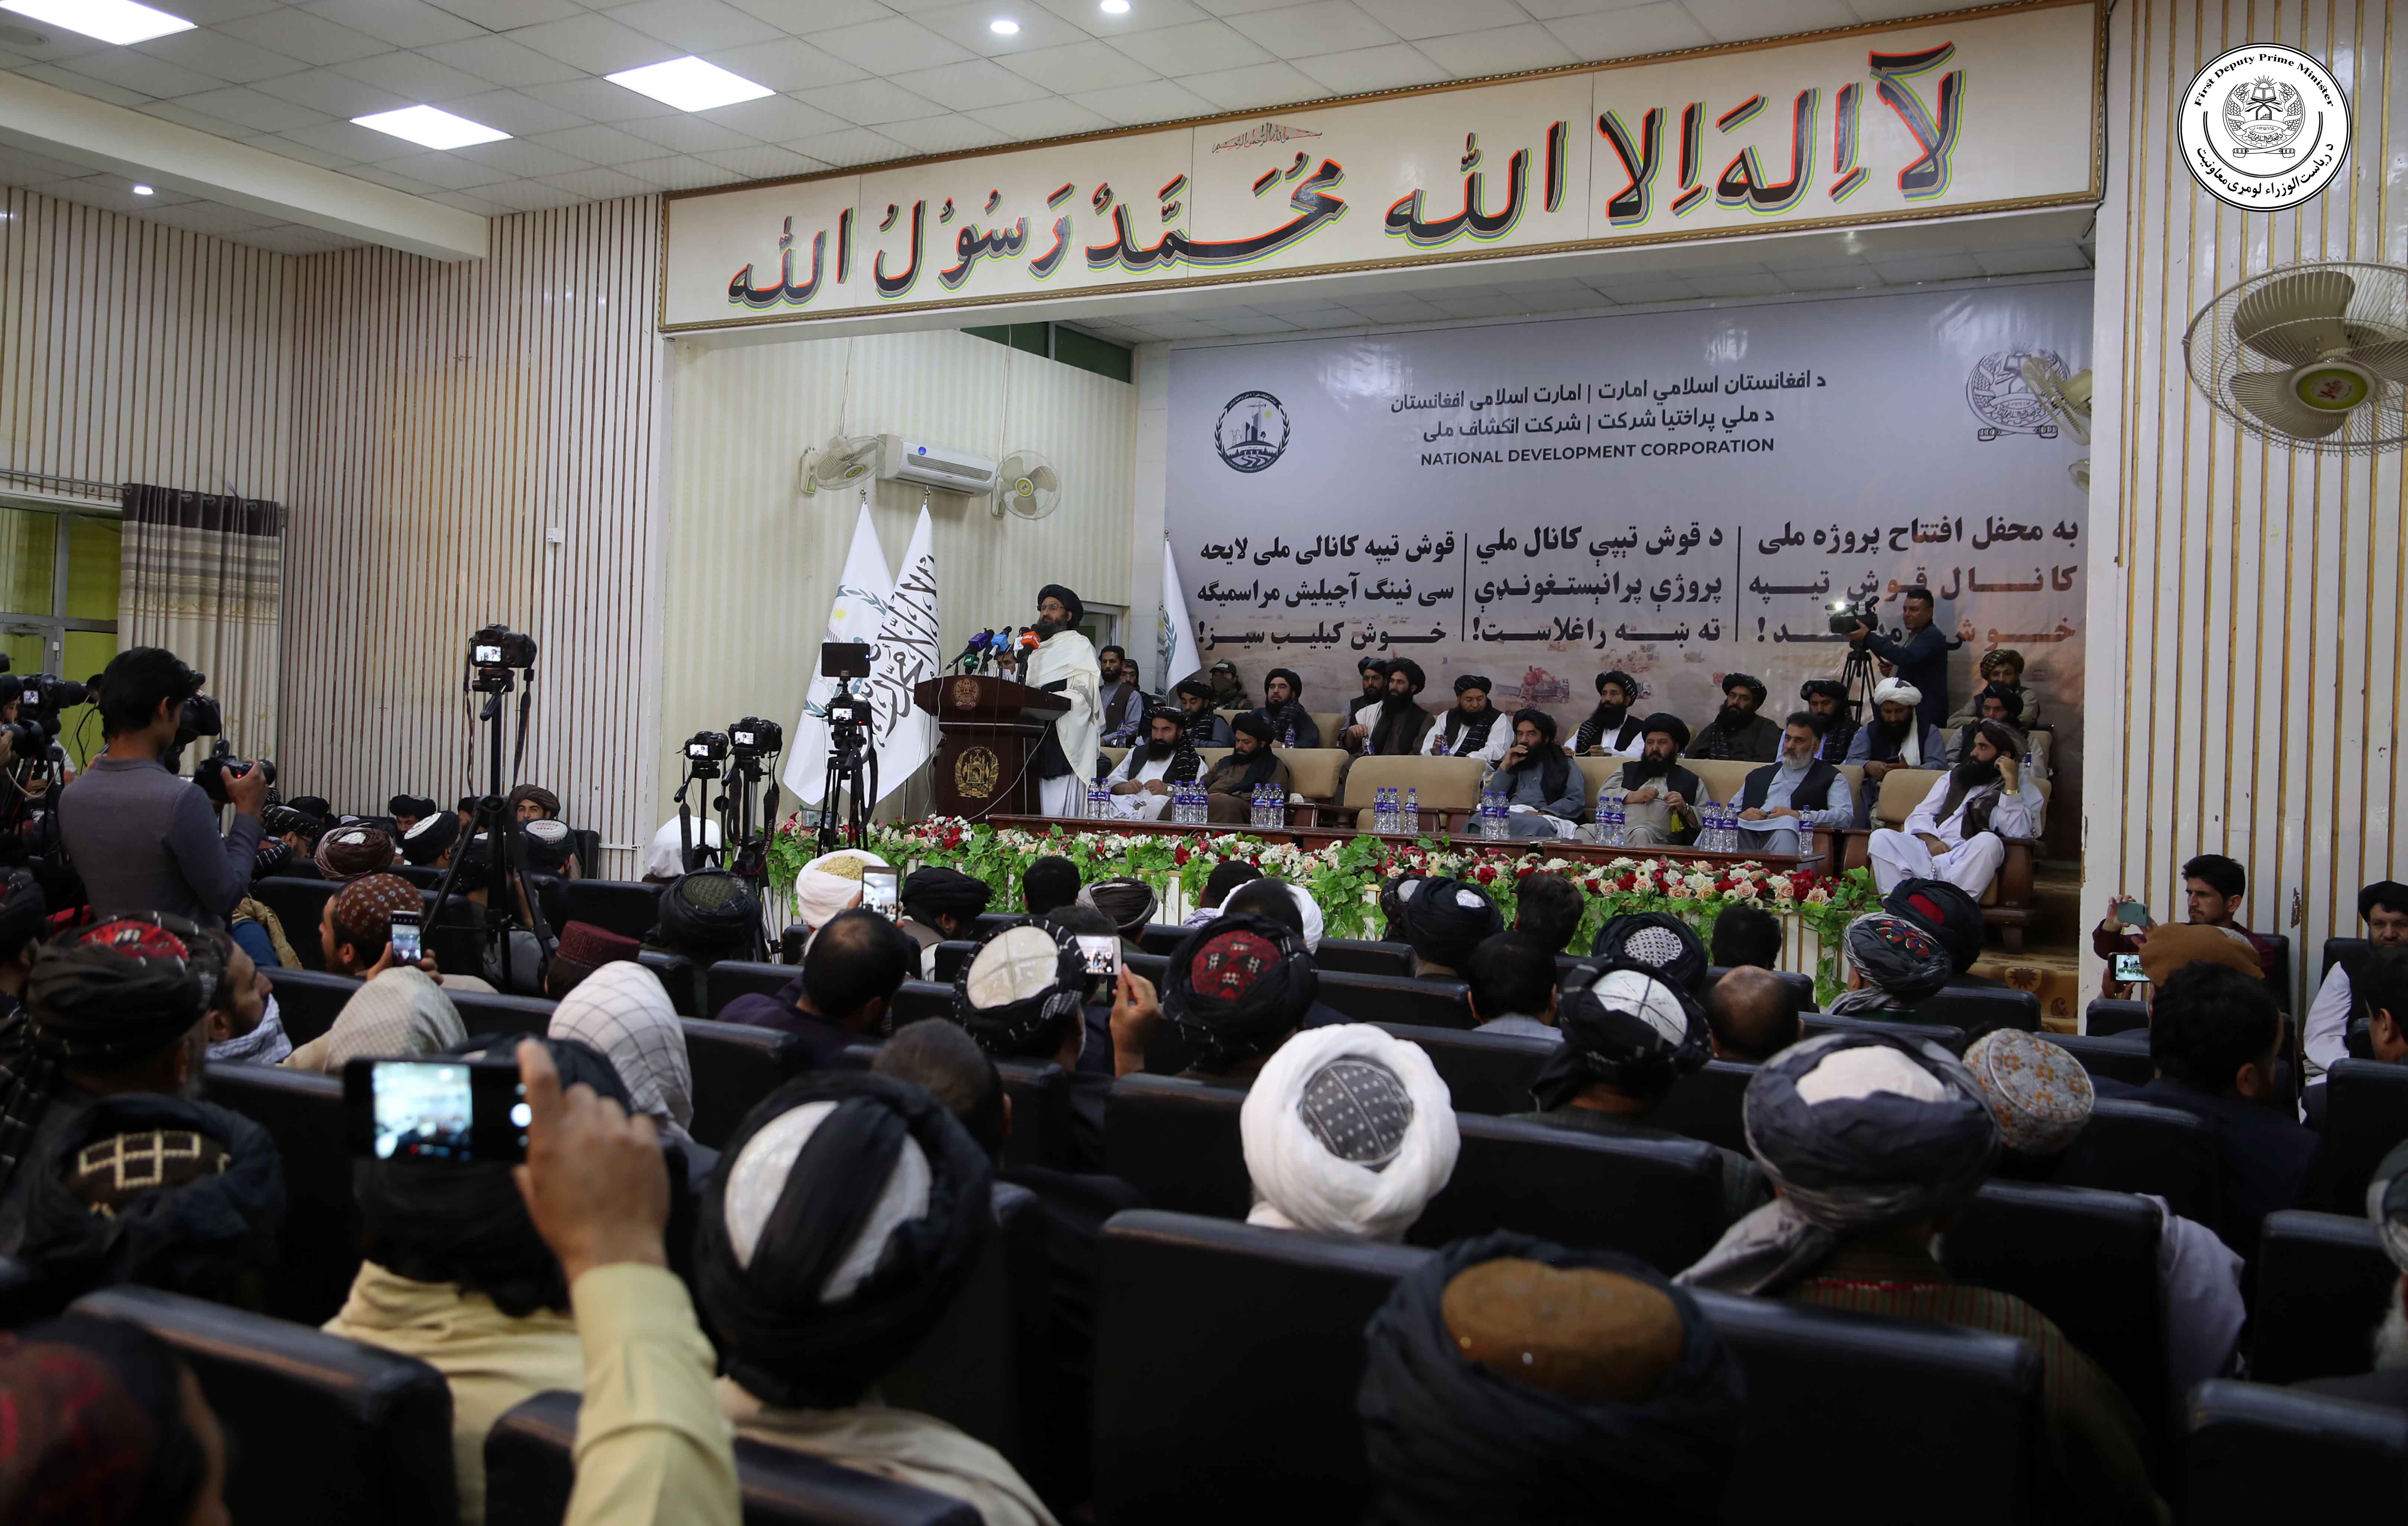 The First Deputy PM attends the opening ceremony of the Qosh Tepa Canal